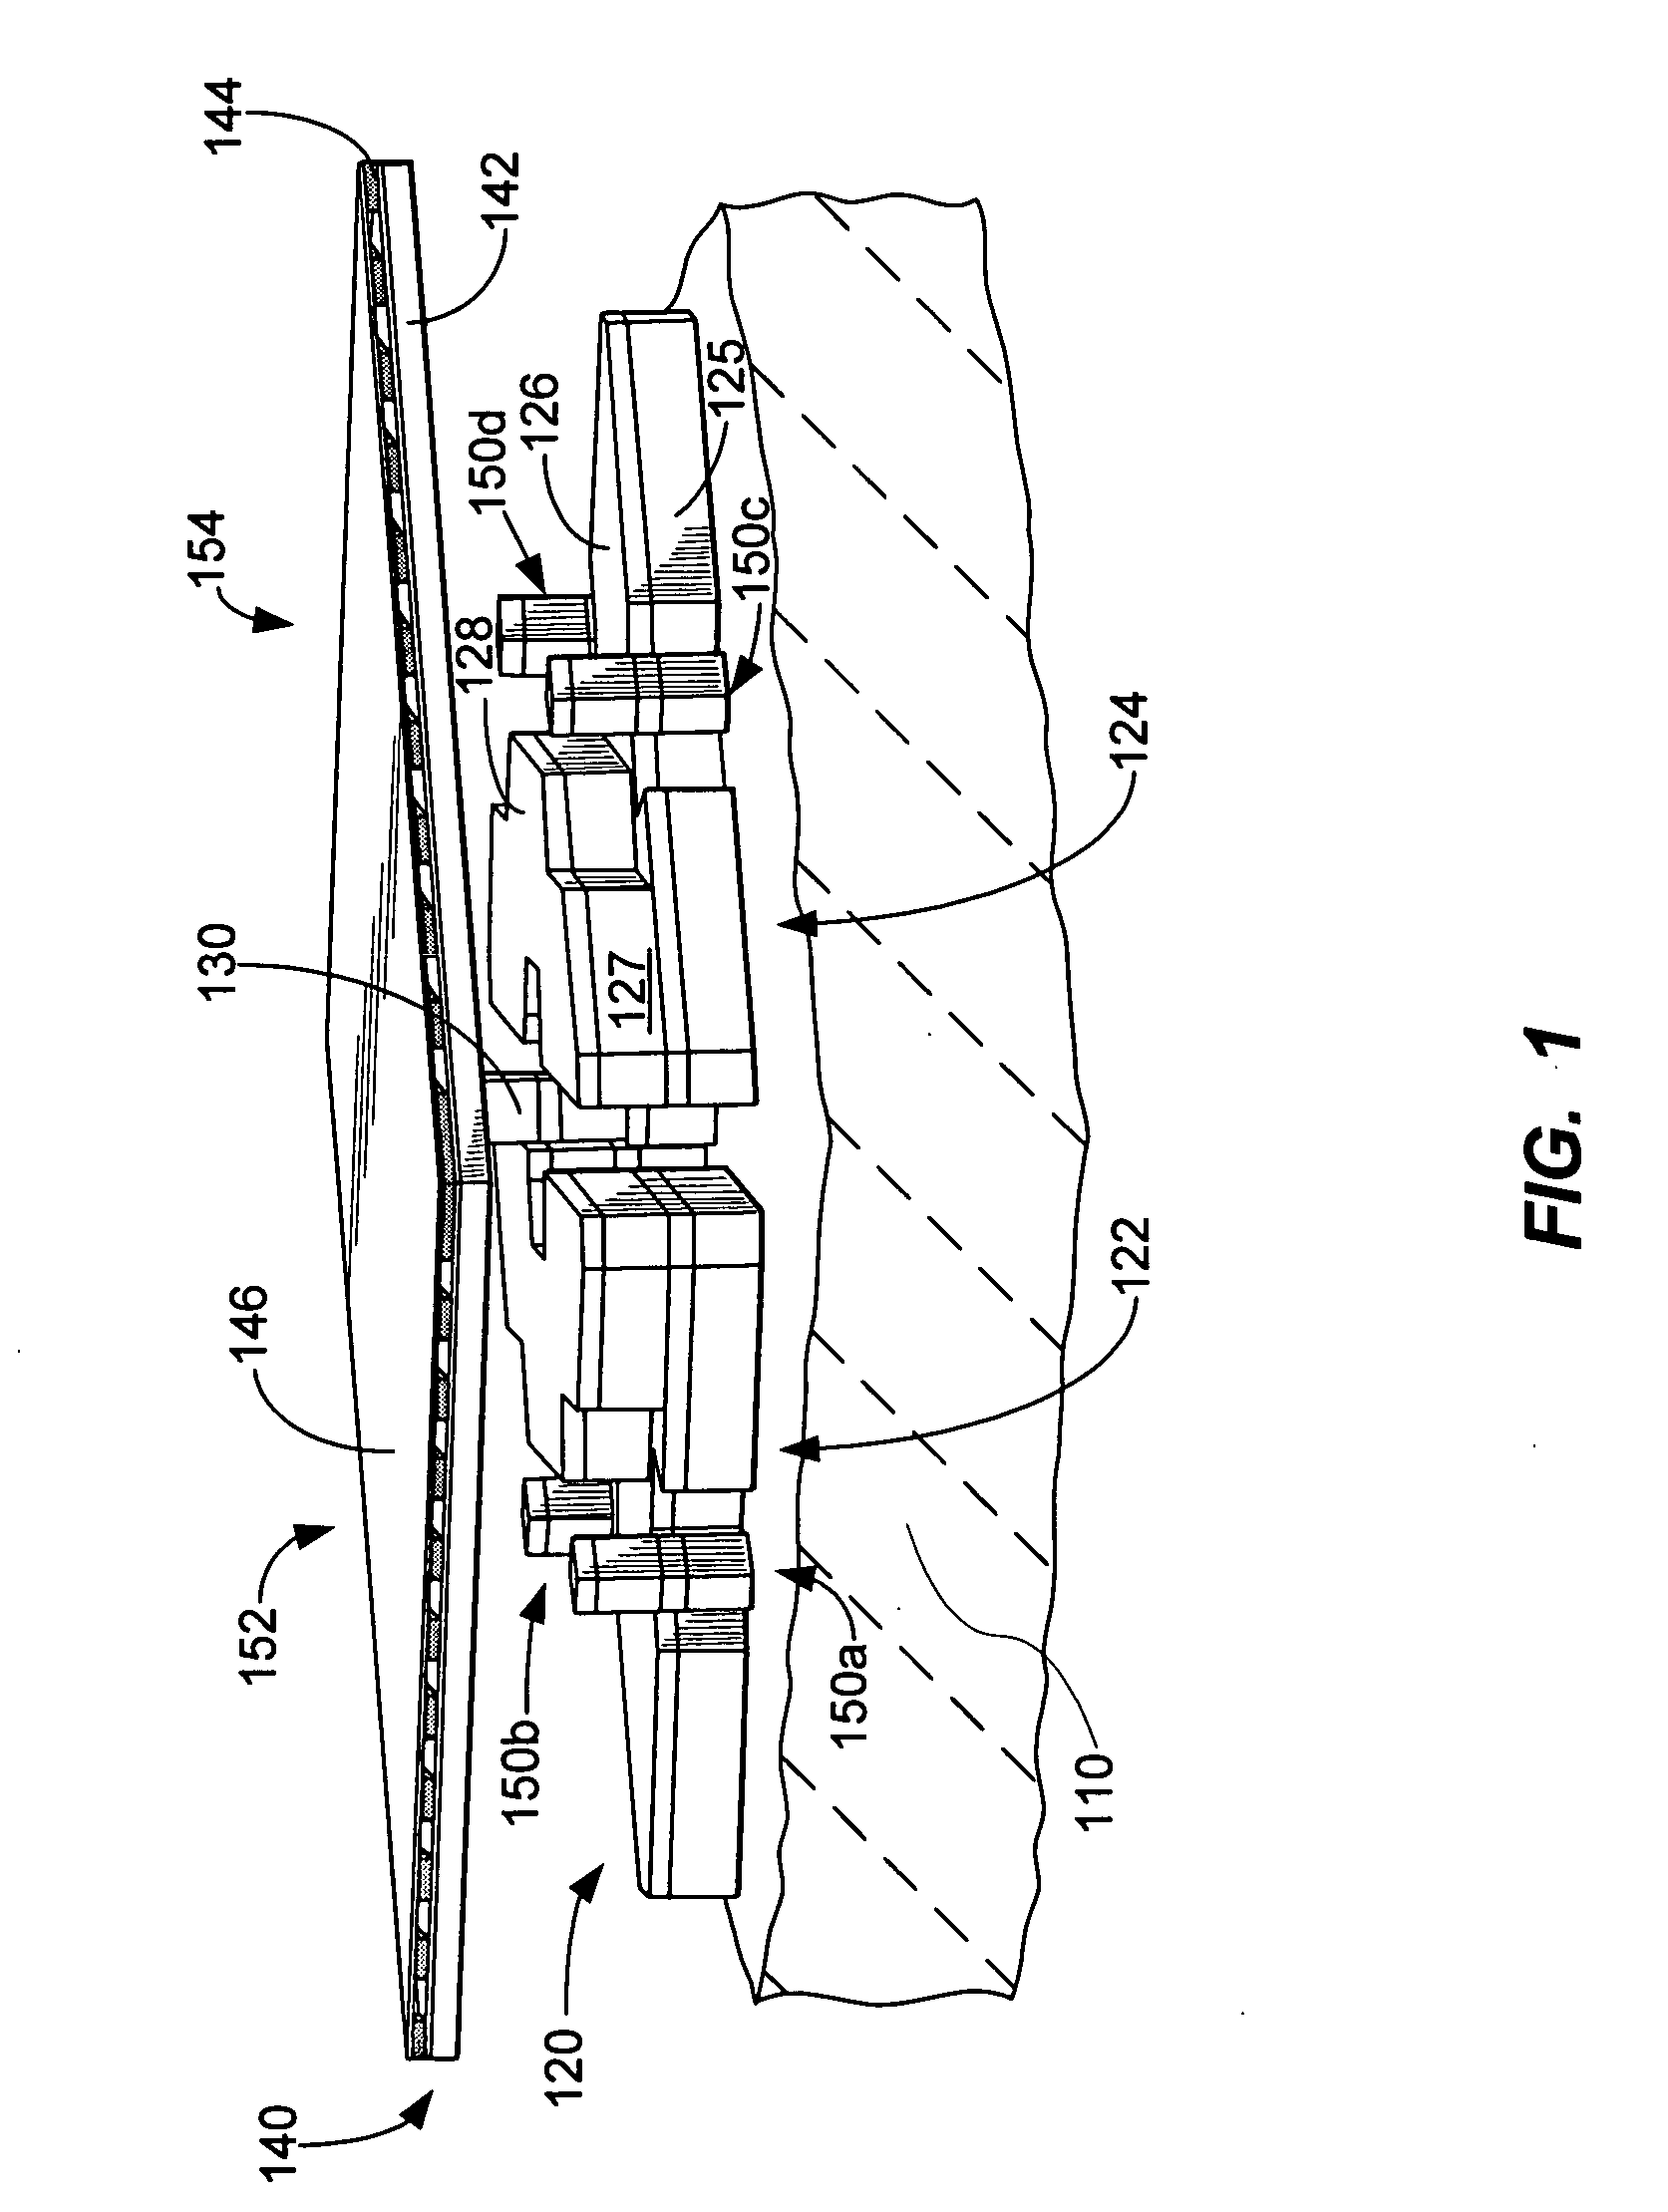 Method and structure for high fill factor spatial light modulator with integrated spacer layer